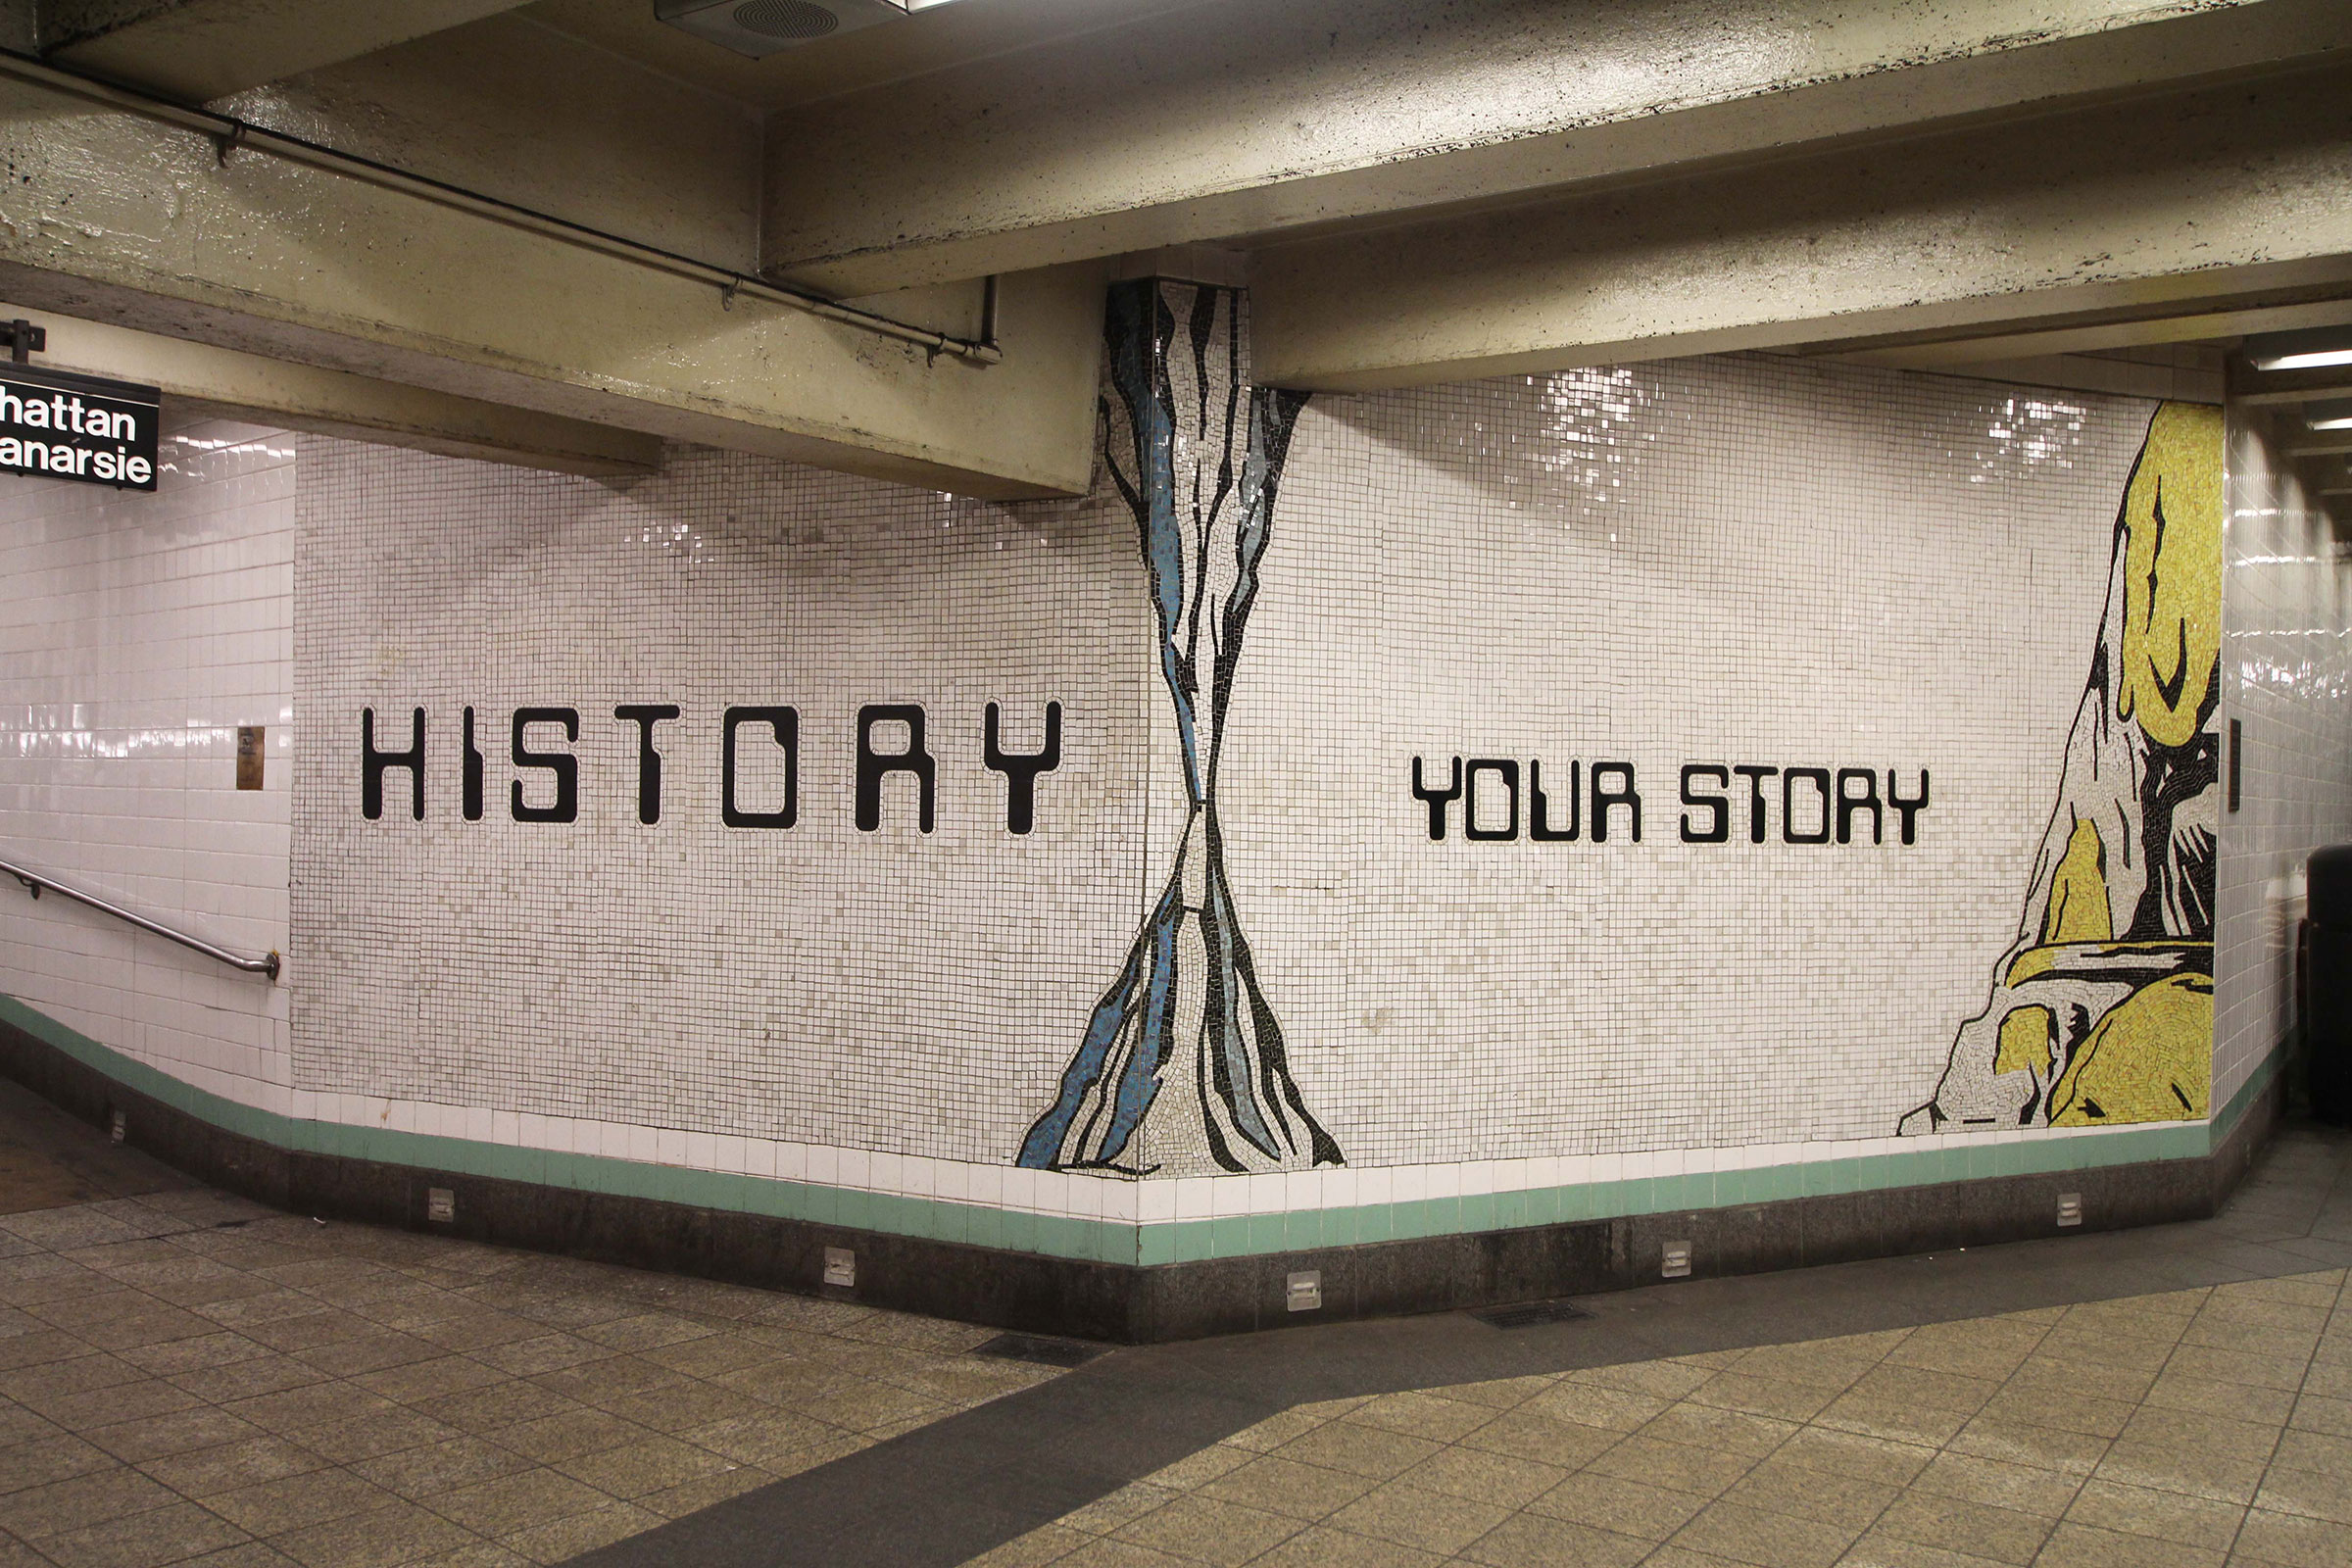 Jackie Chang, visiting instructor of social science and cultural studies, “Signs of Life” (2001) in the Metropolitan Avenue (G) station (photo by ShellyS/Flickr)